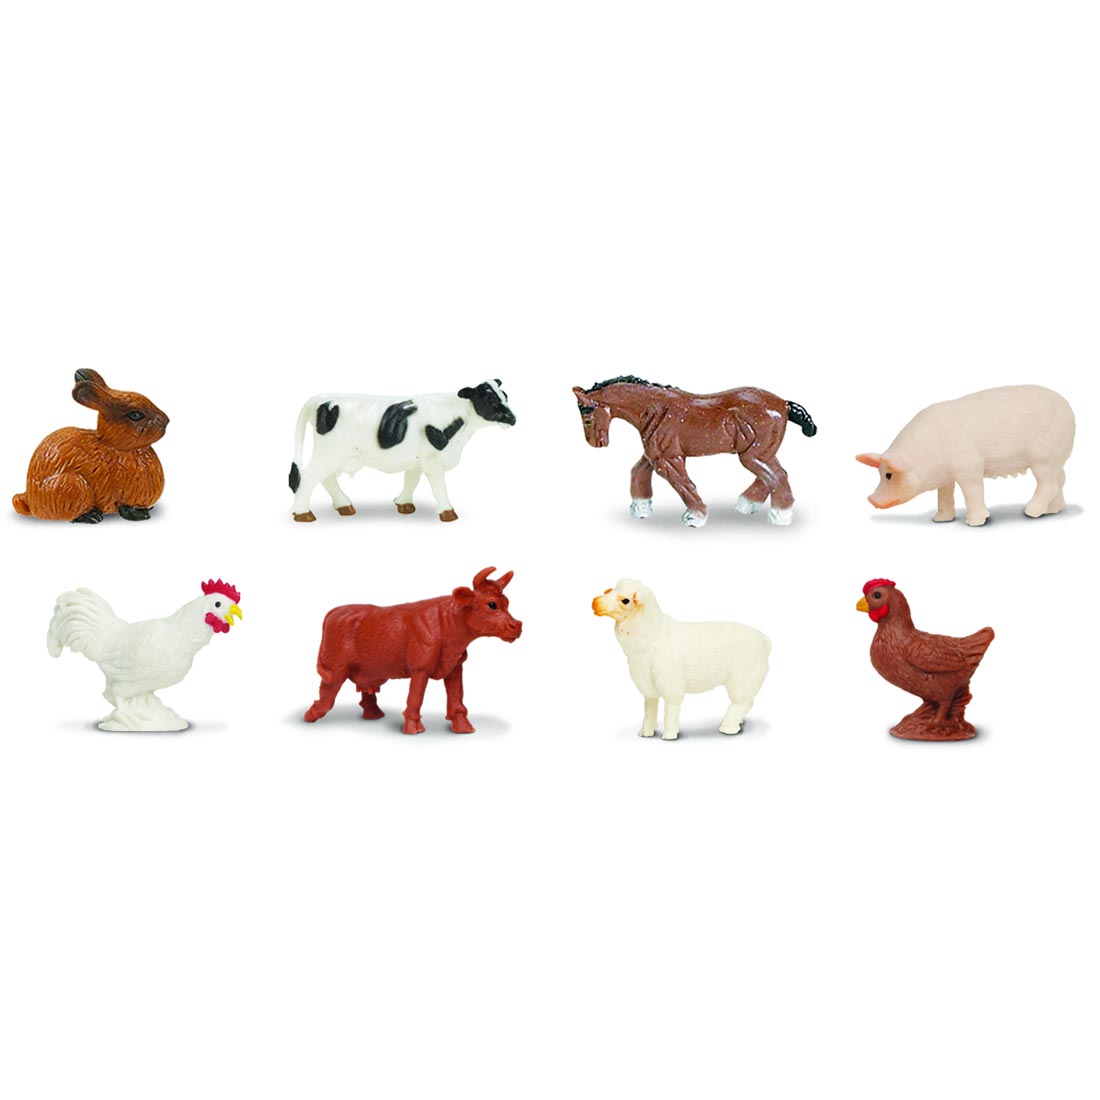 Farm Animal Mini Figurines include rabbit, holstein cow, horse, sow, rooster, brown cow, sheep and hen.